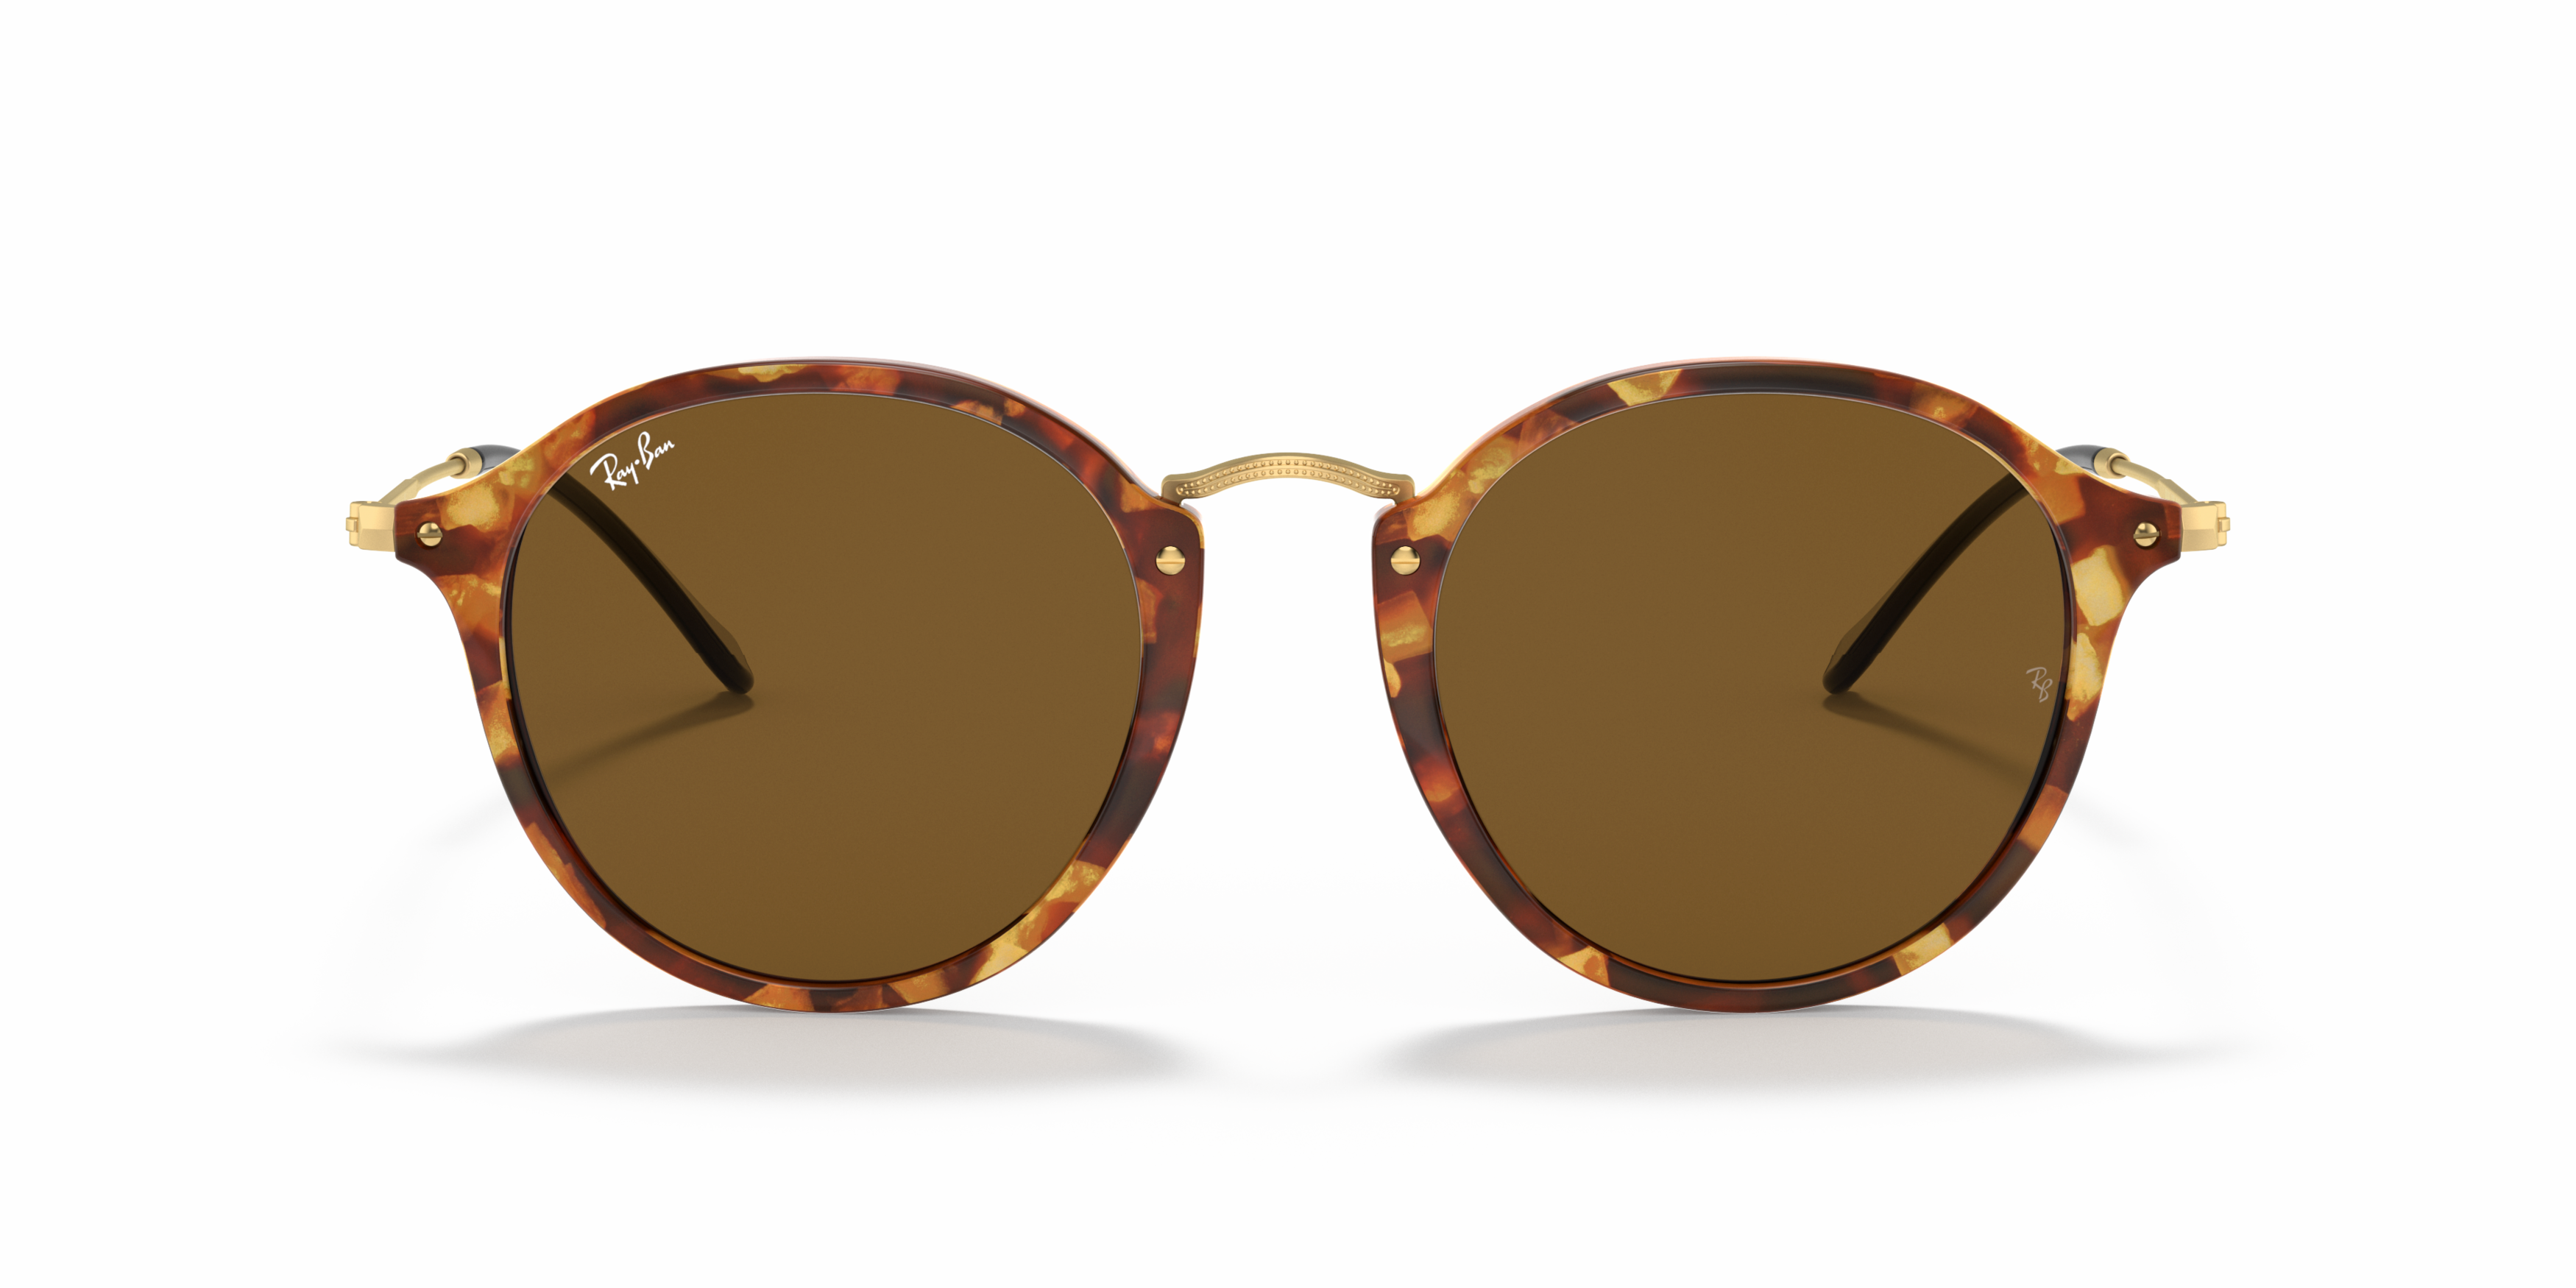 [products.image.front] Ray-Ban ROUND/CLASSIC 1160